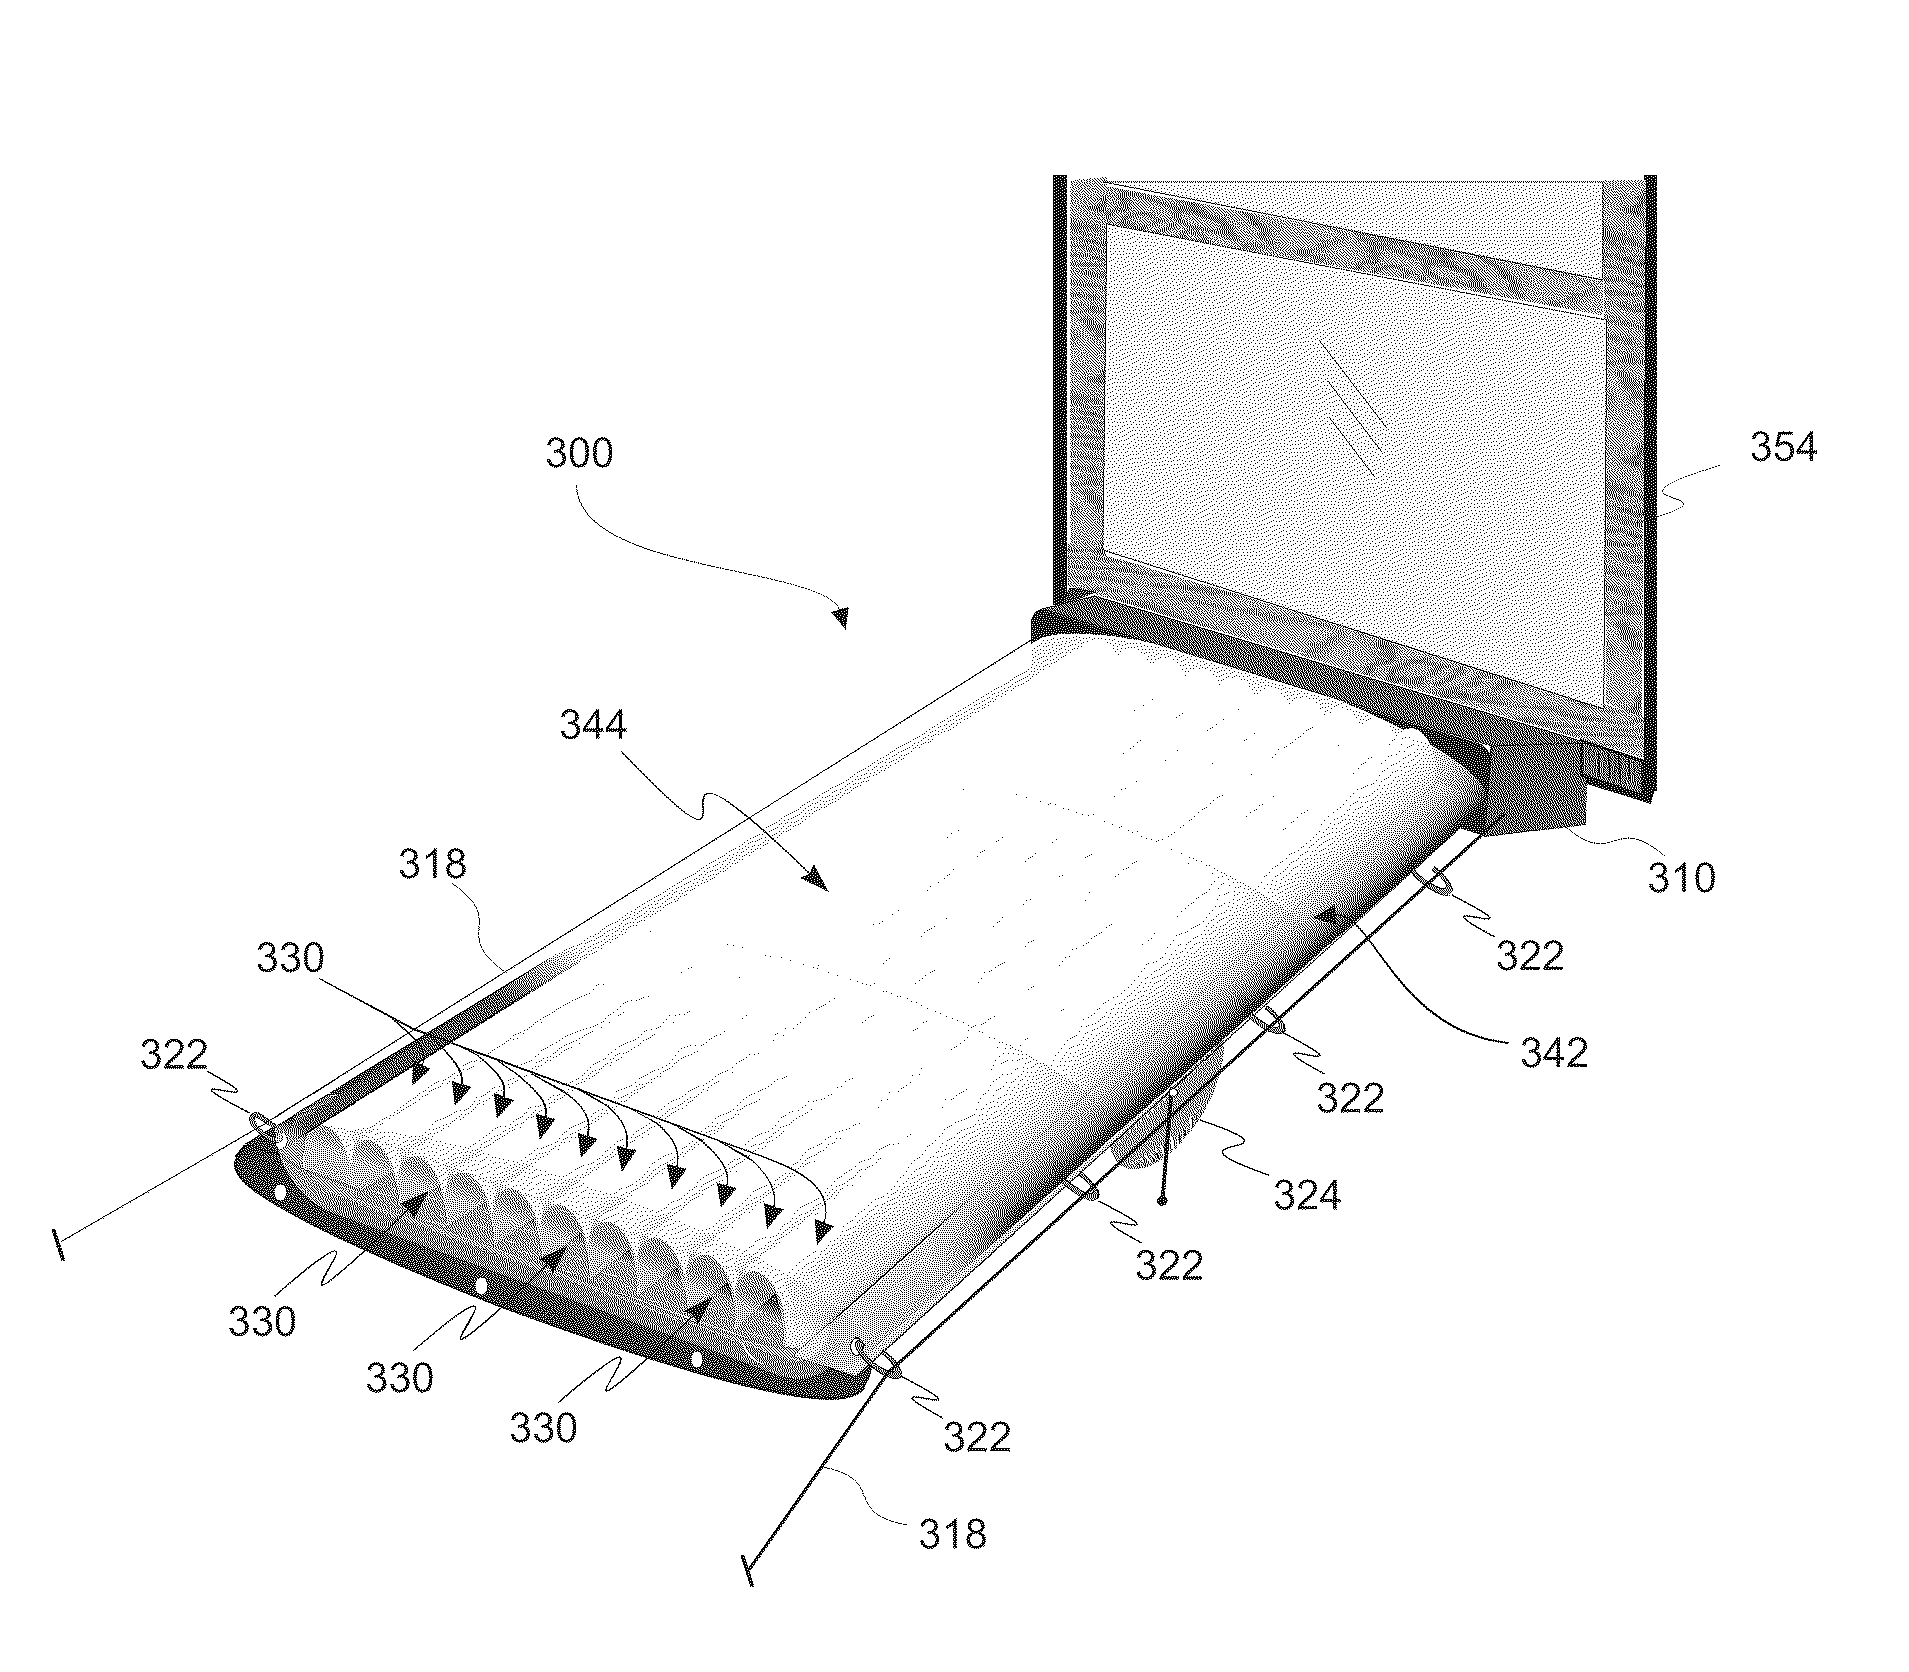 Portable solar-heating system having an inflatable solar collector